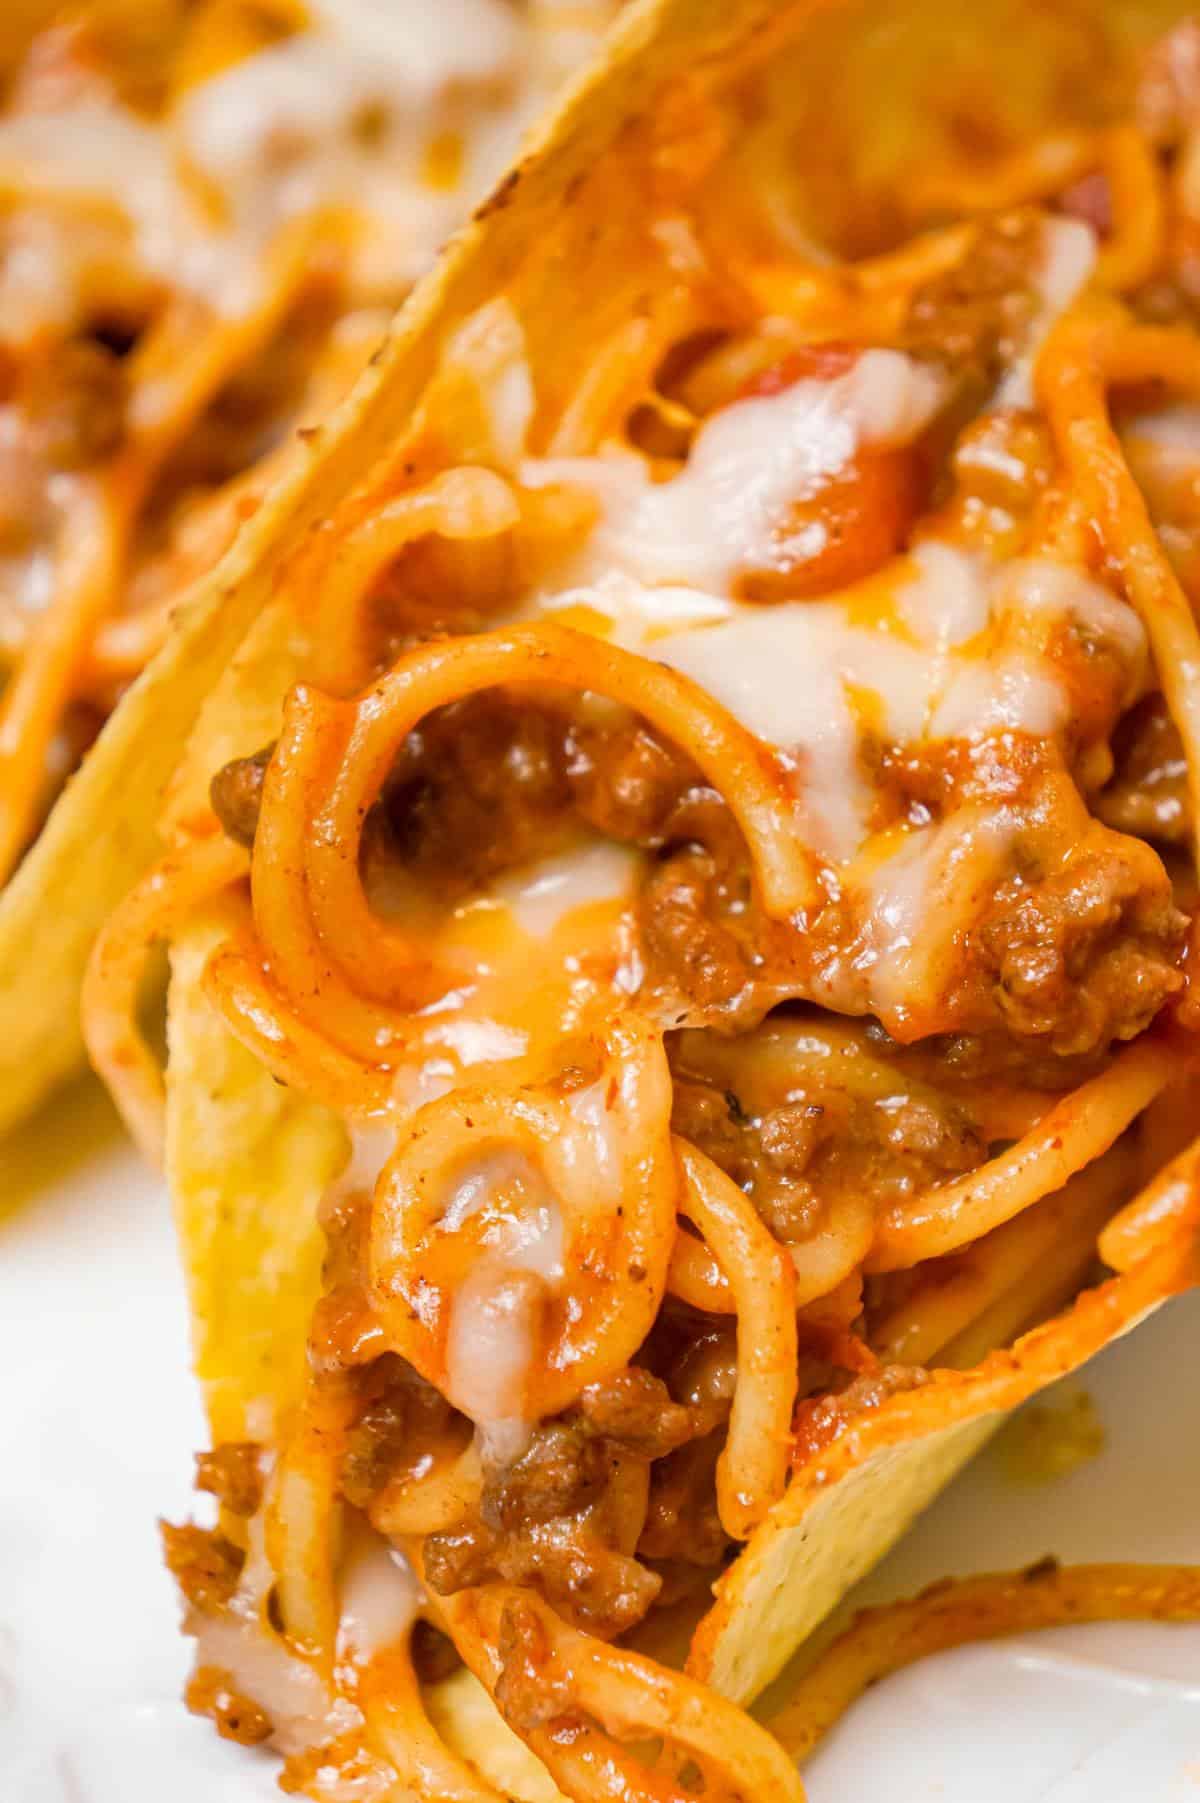 Spaghetti Tacos - THIS IS NOT DIET FOOD